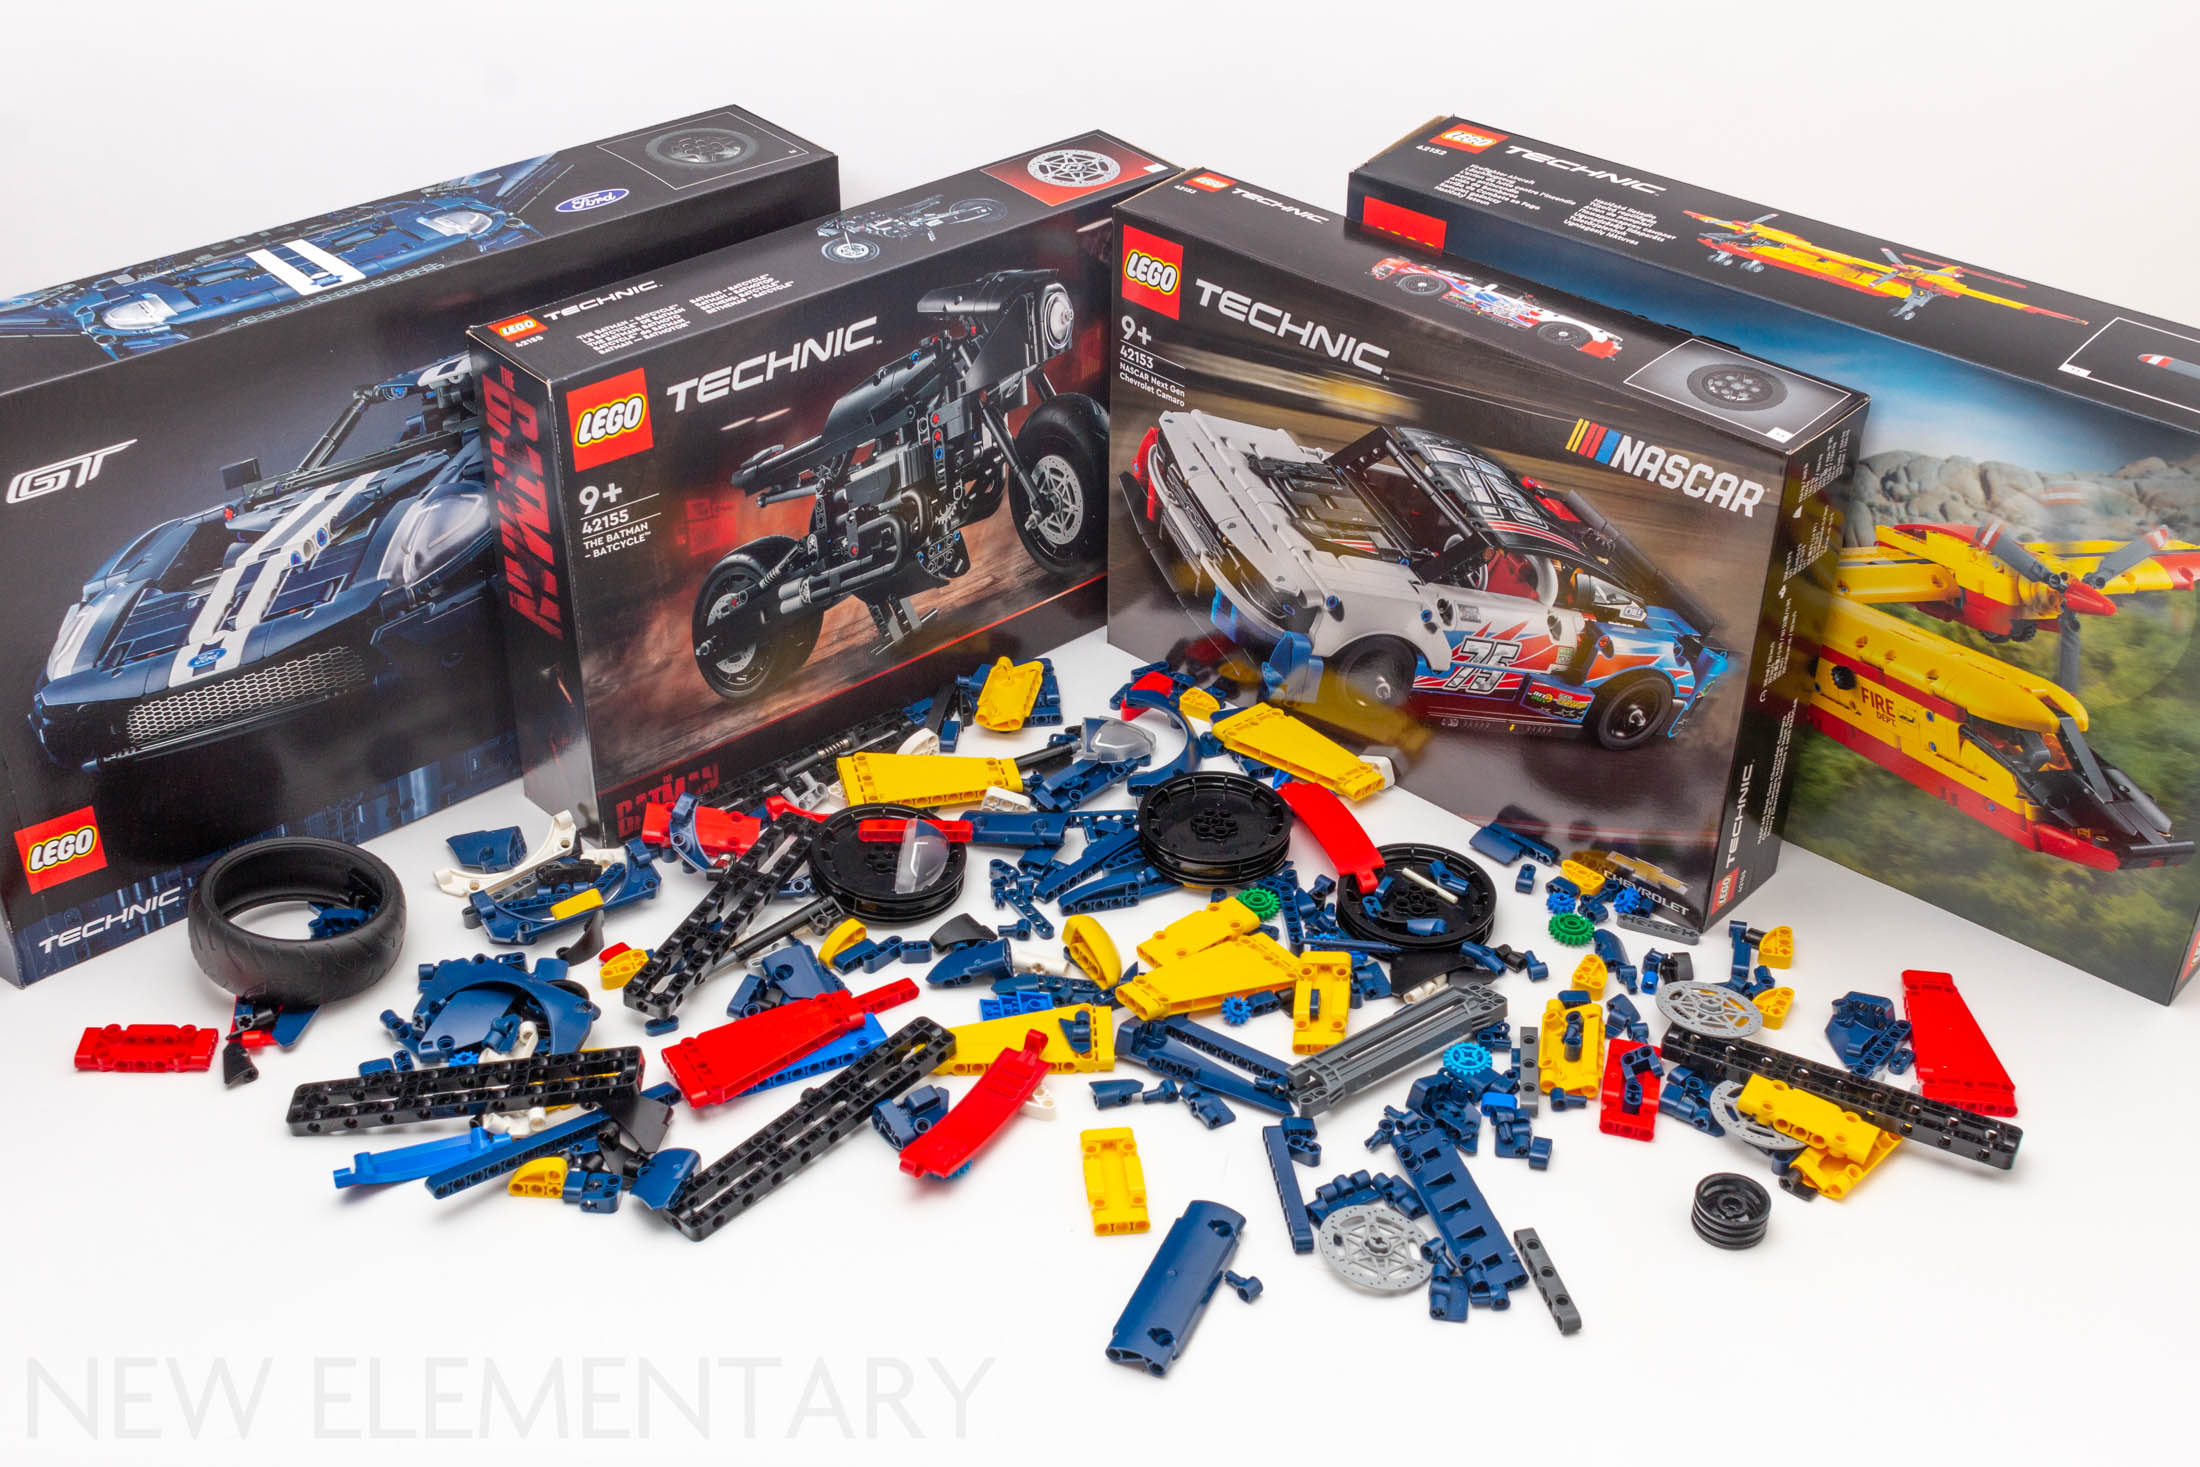 The LEGO The Batman sets are all available for pre-order